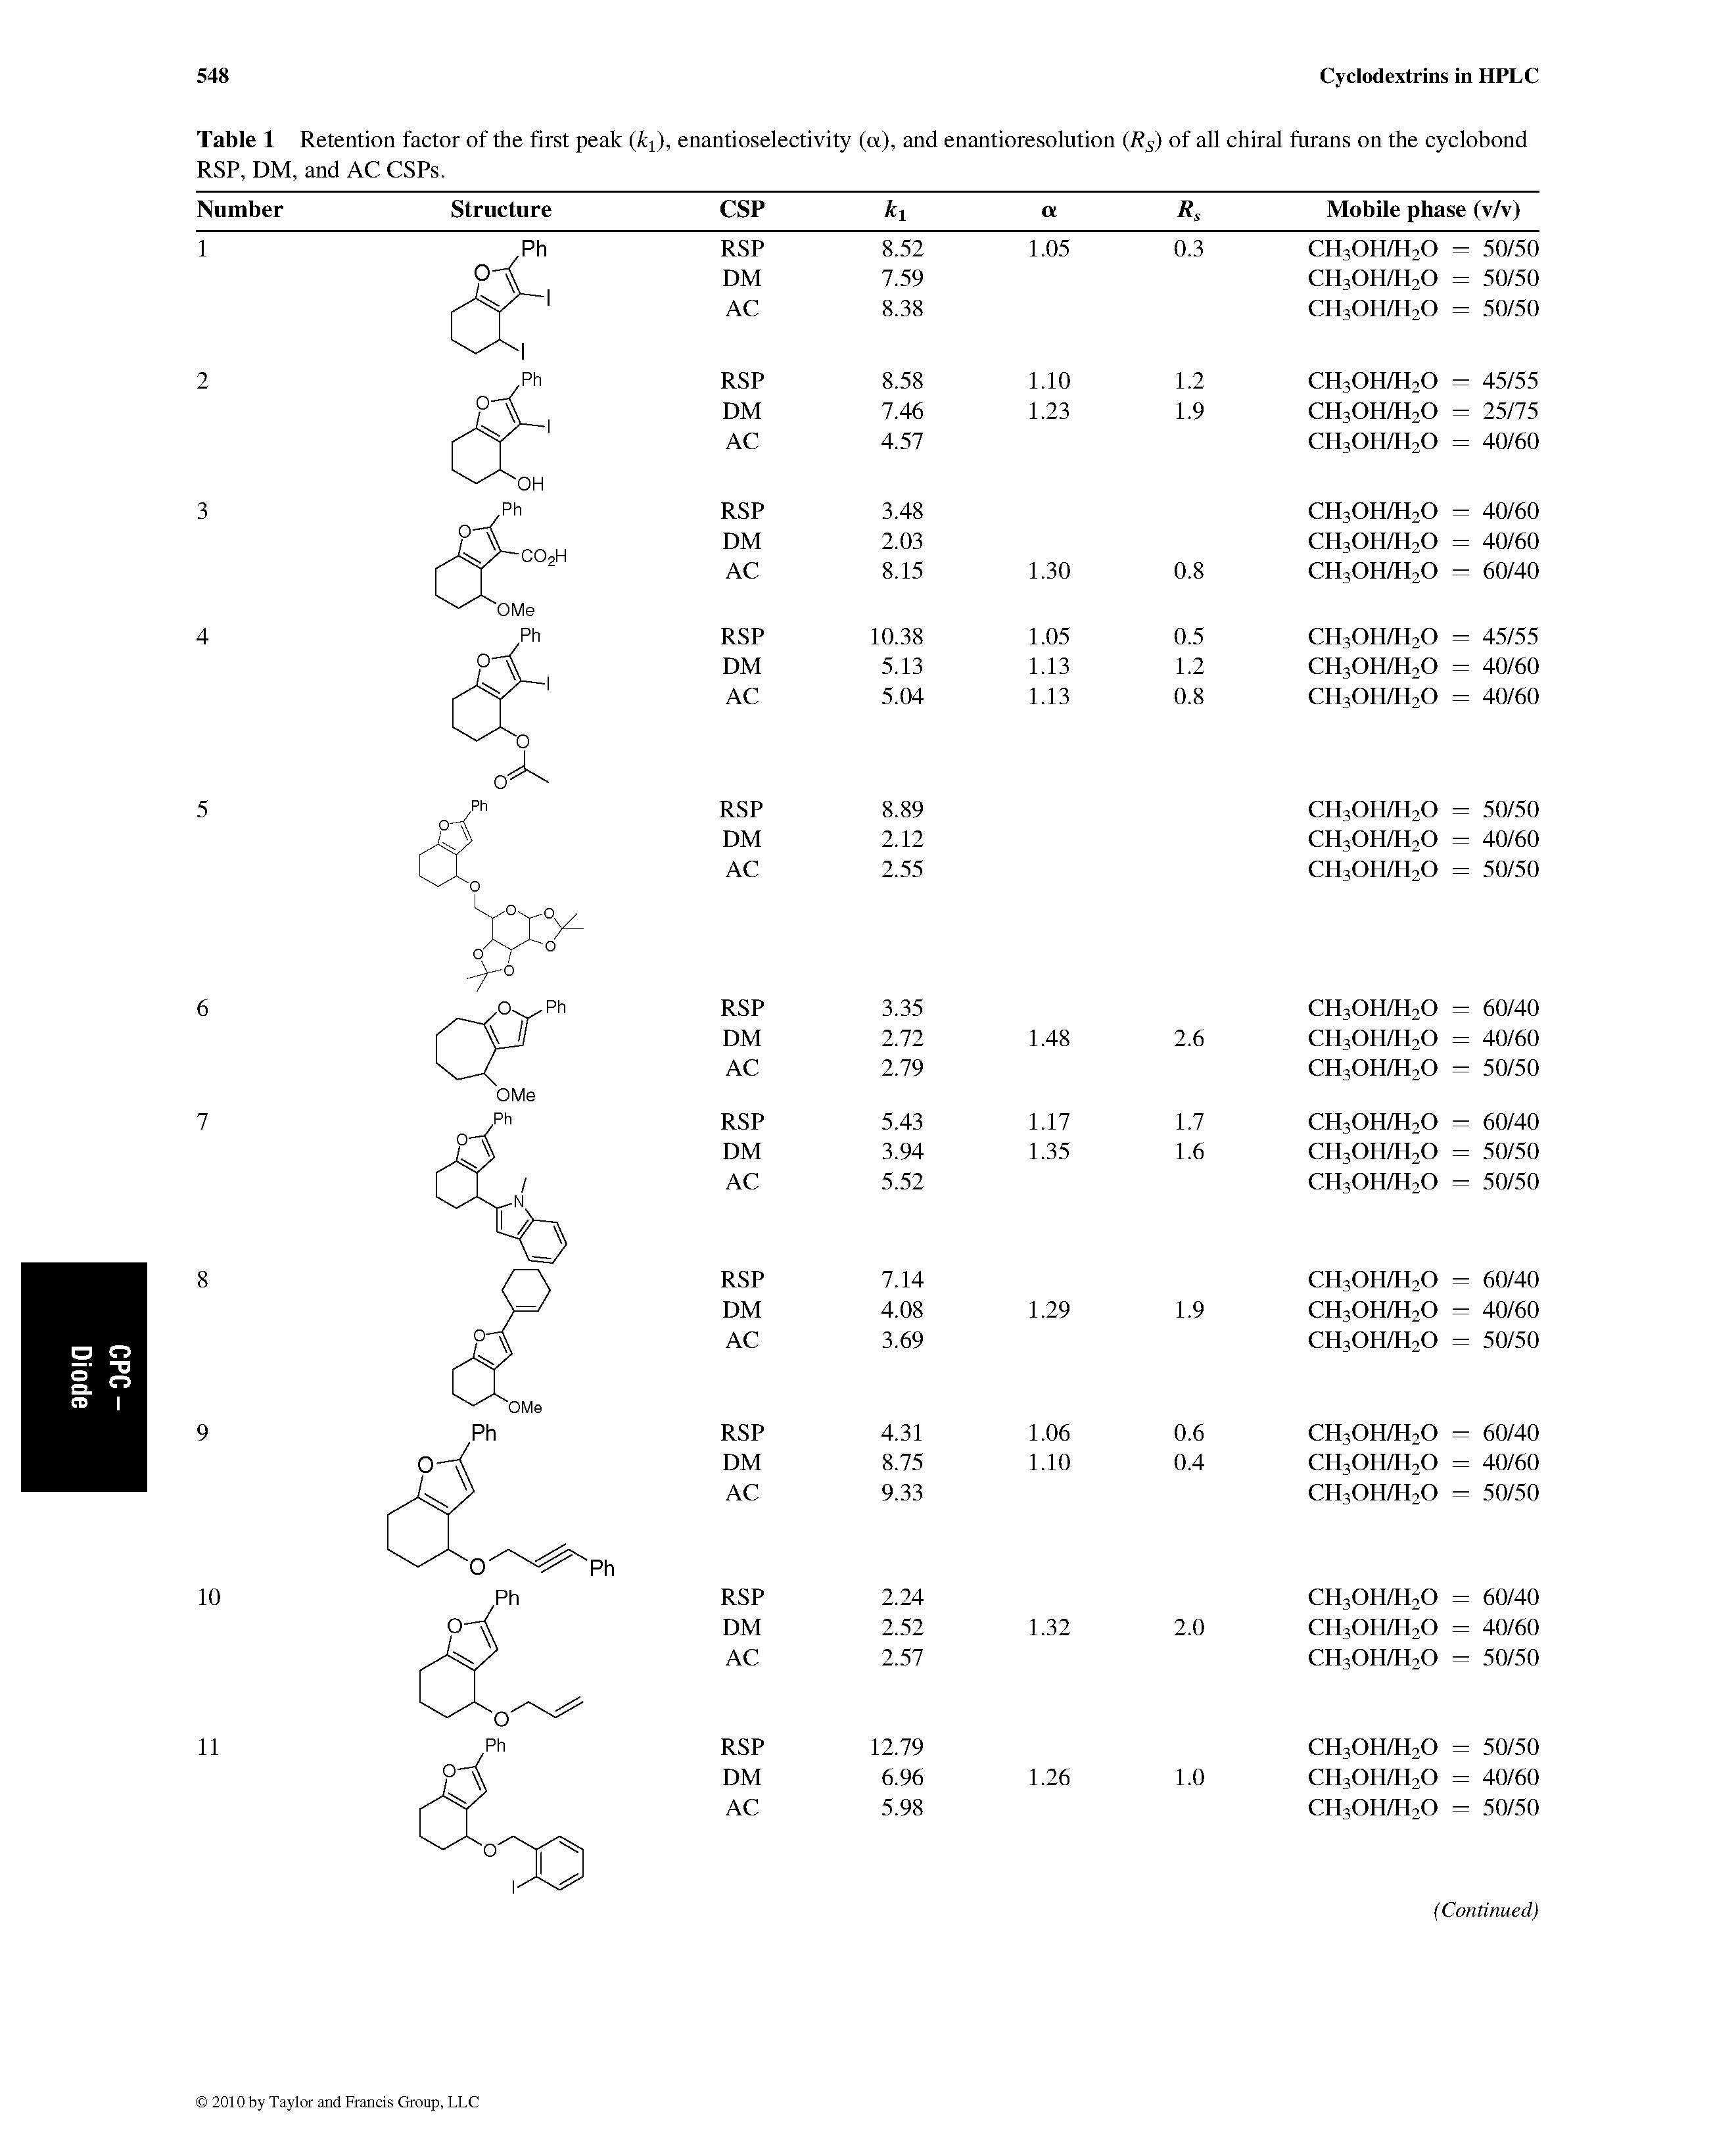 Table 1 Retention factor of the first peak ki), enantioselectivity (a), and enantioresolution Rg) of all chiral furans on the cyclobond RSP, DM, and AC CSPs.